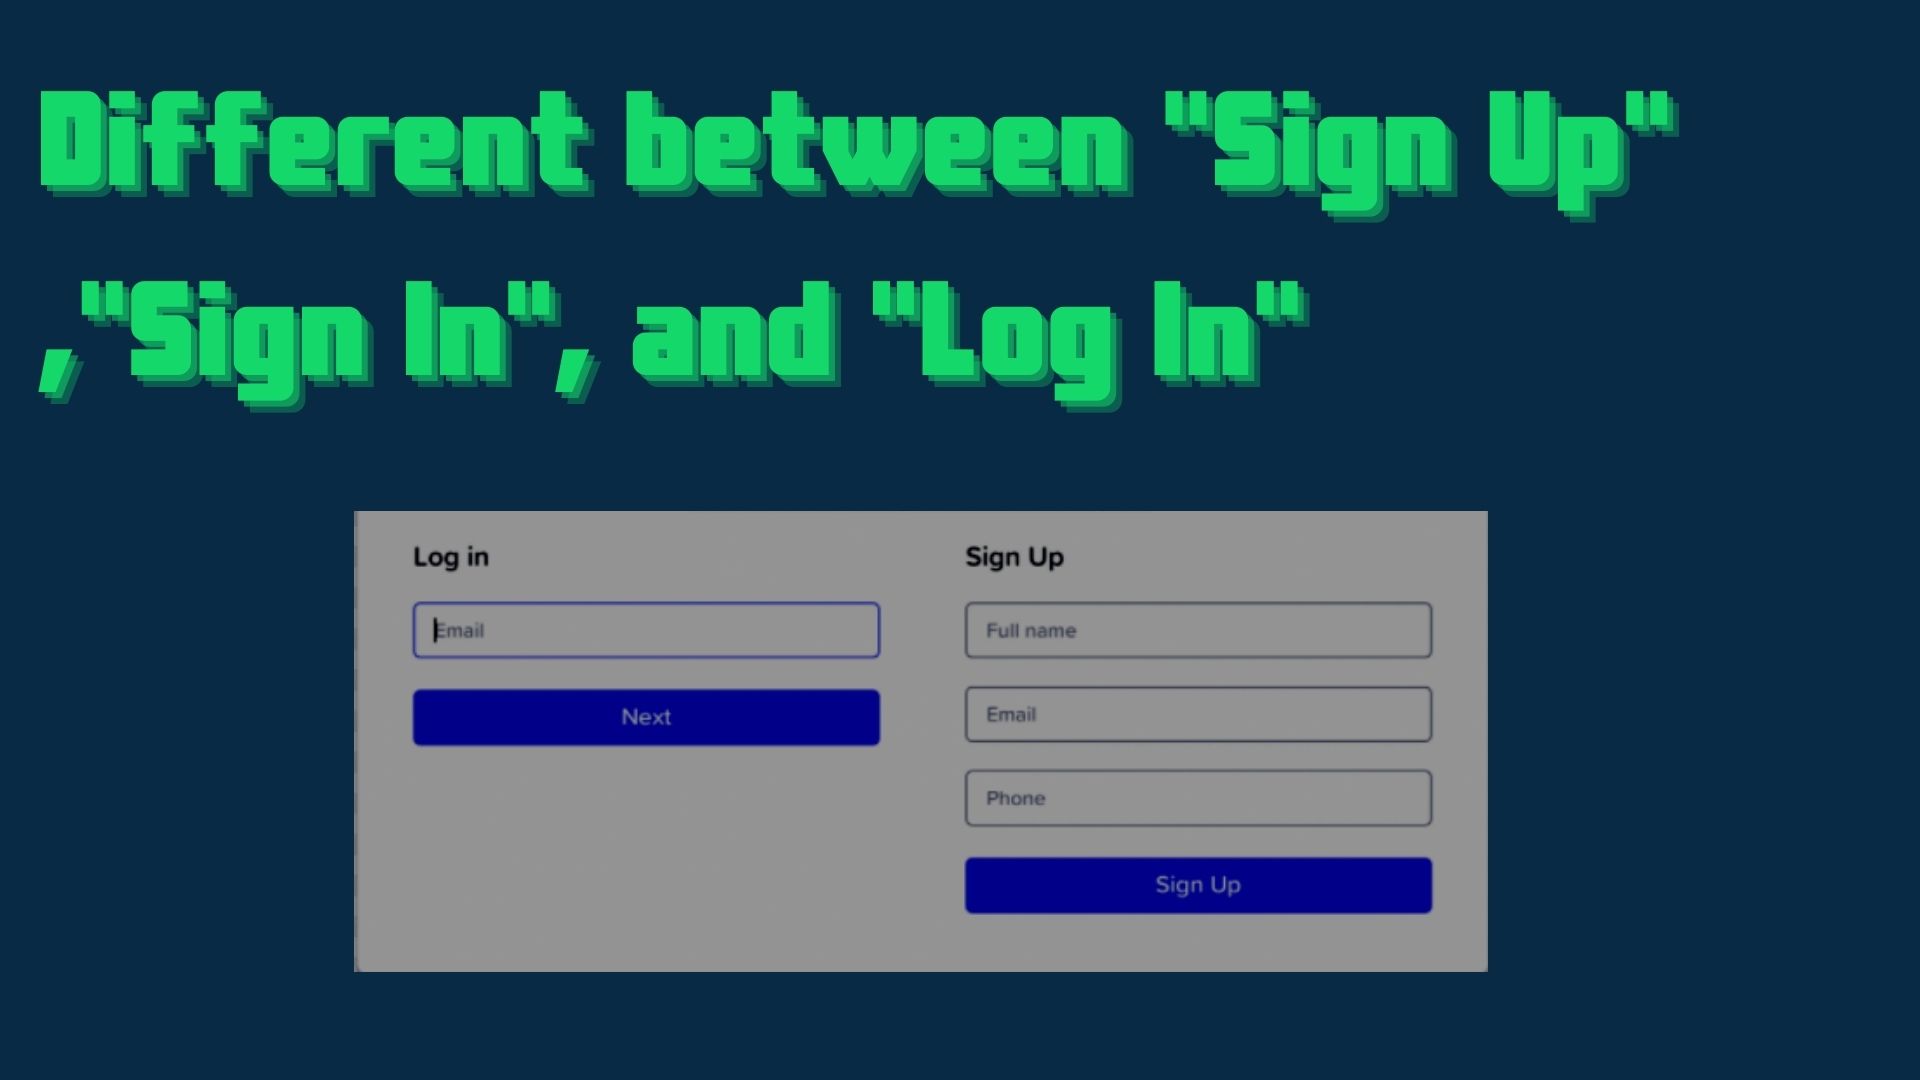 sign-up-sign-in-log-in